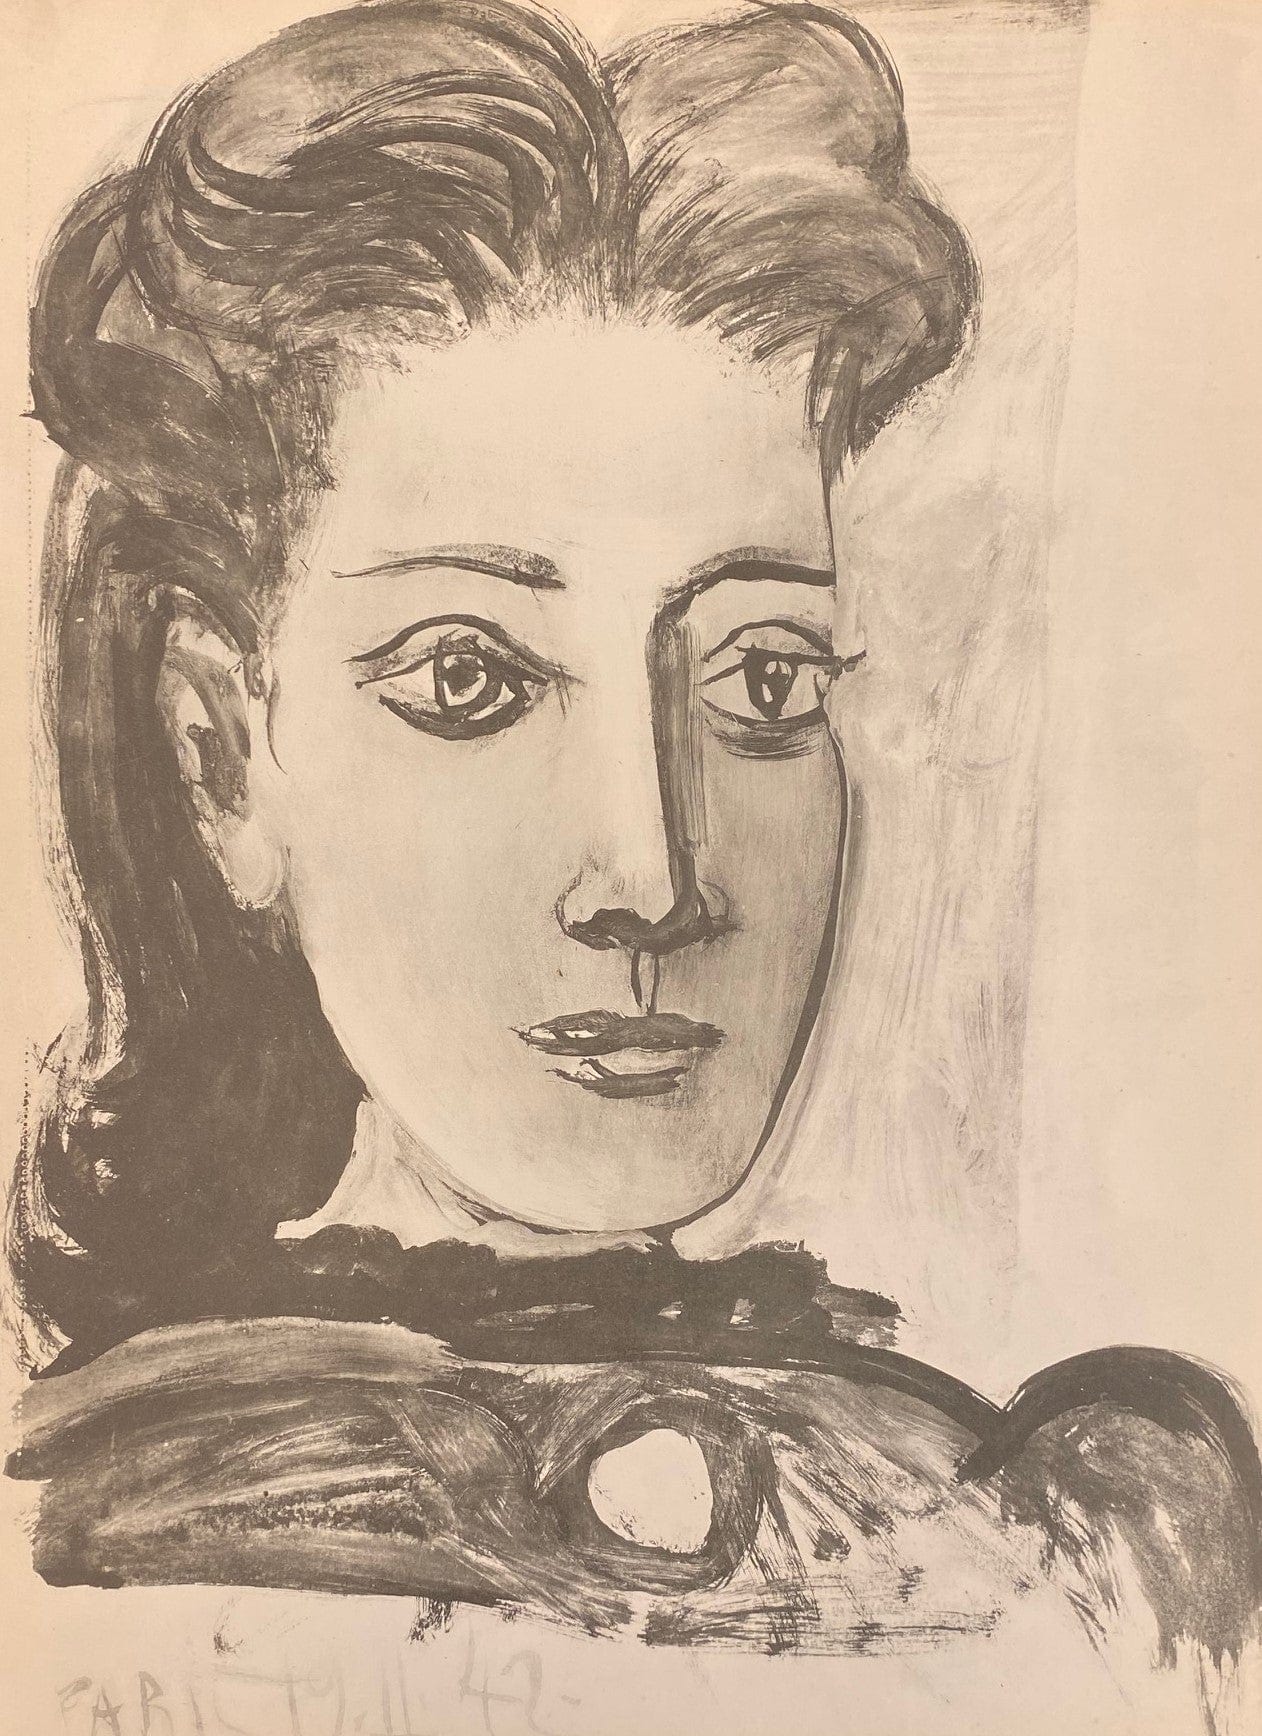 Pablo Picasso; Untitled from Carnet de Dessins II